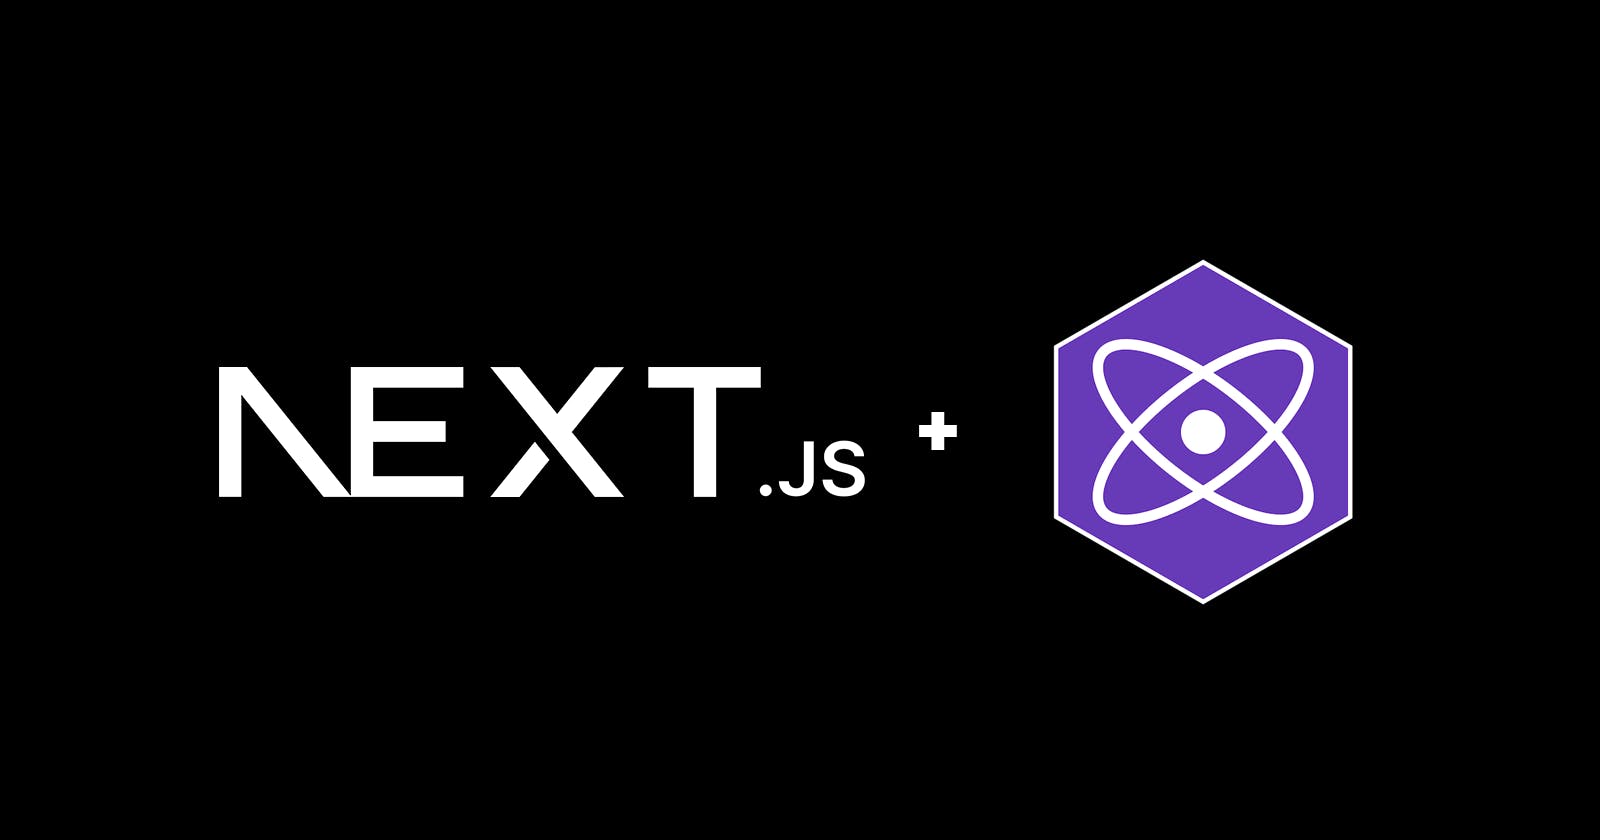 Use Preact in Next.js 13